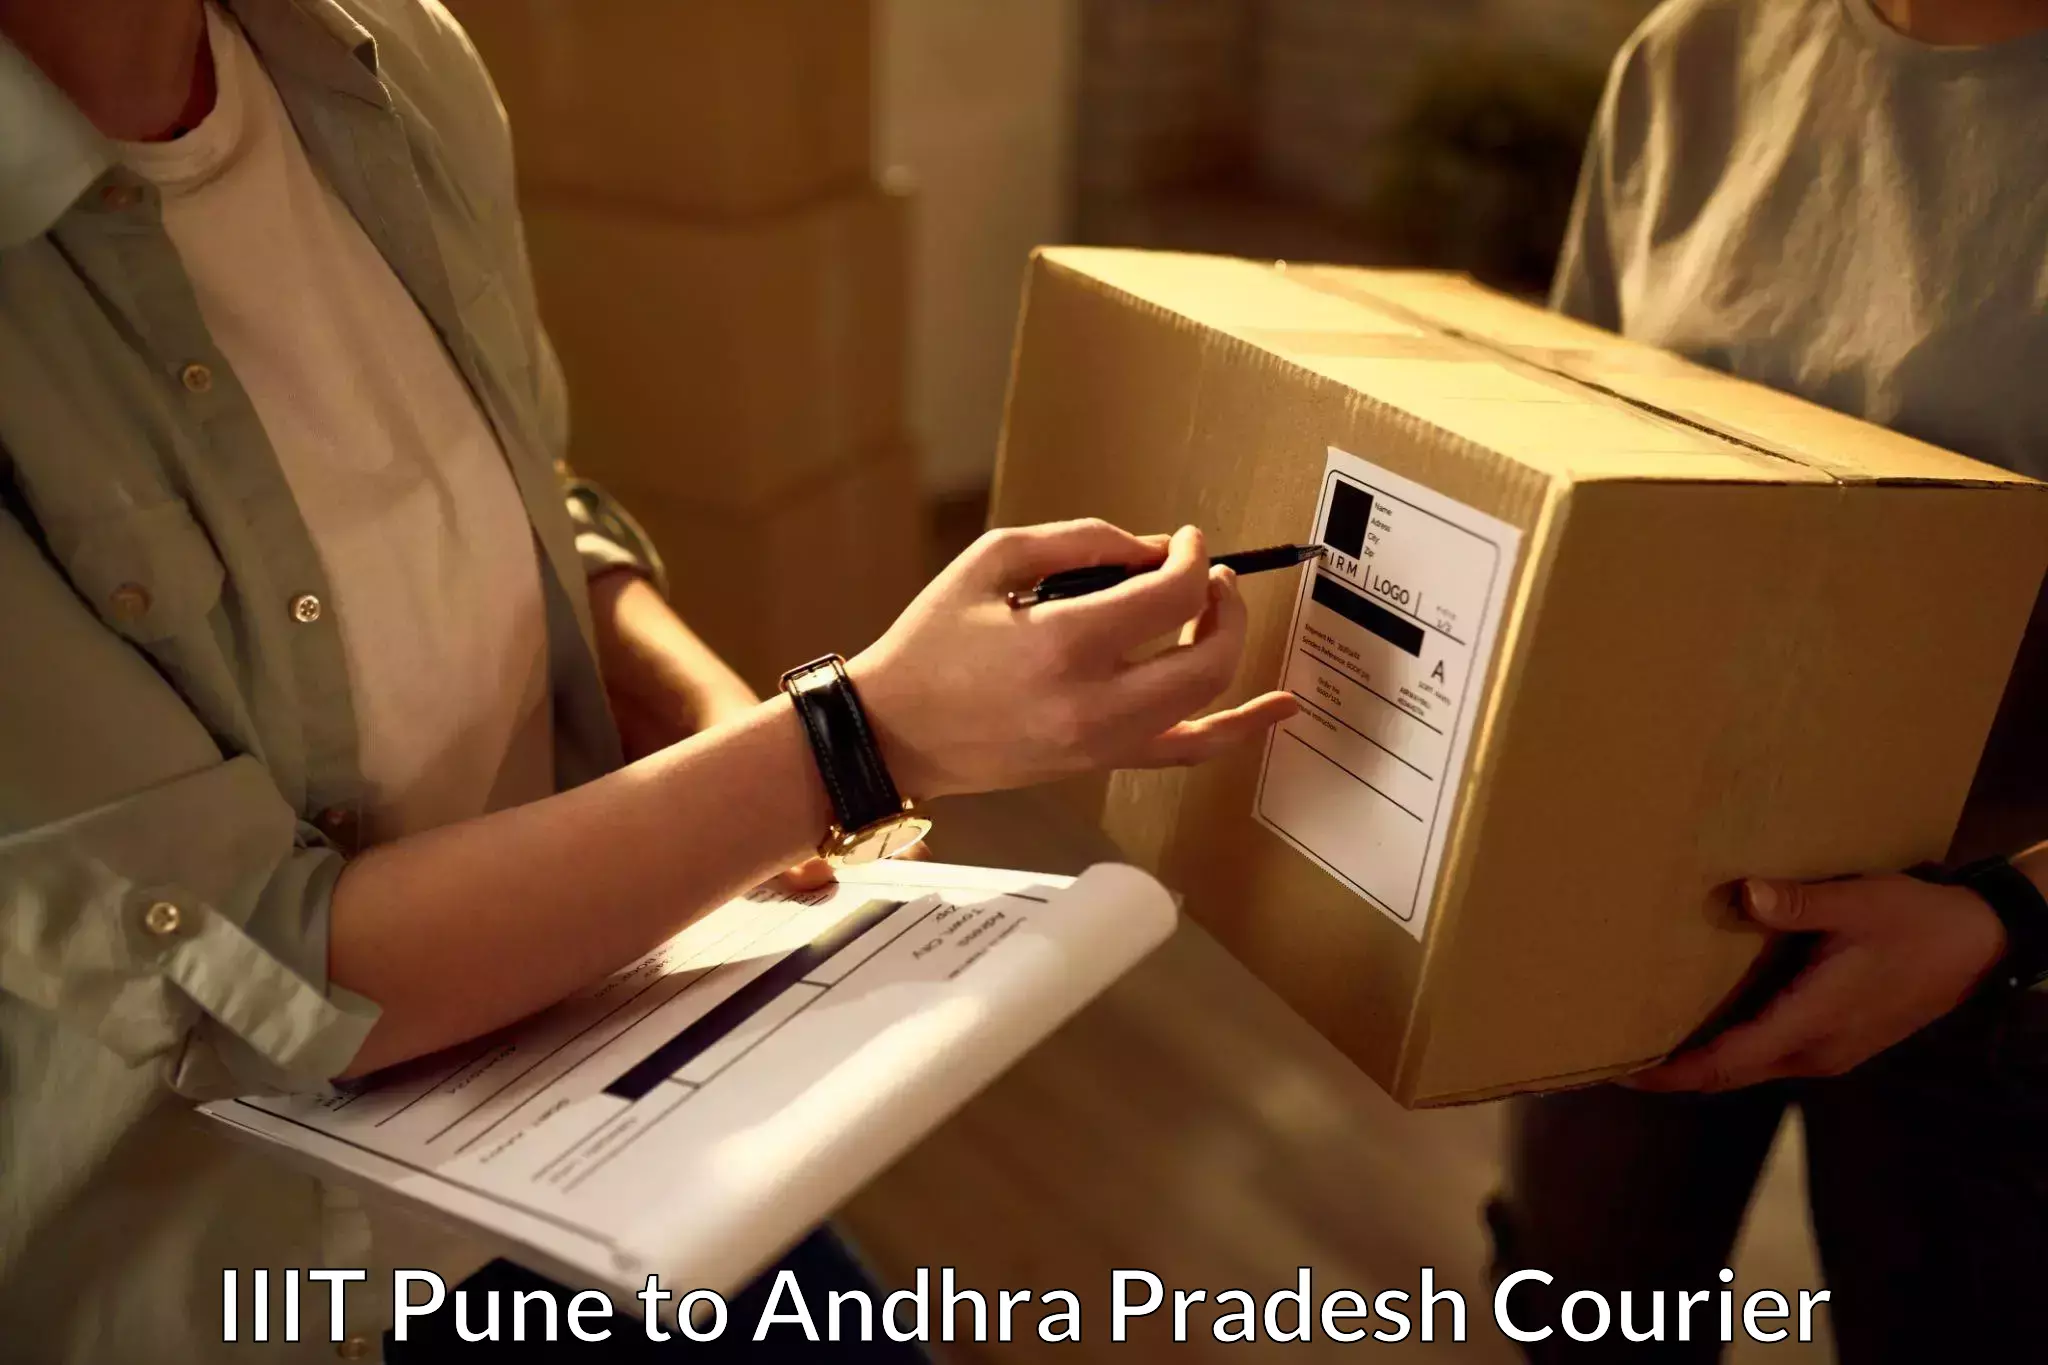 Courier service booking IIIT Pune to Waltair